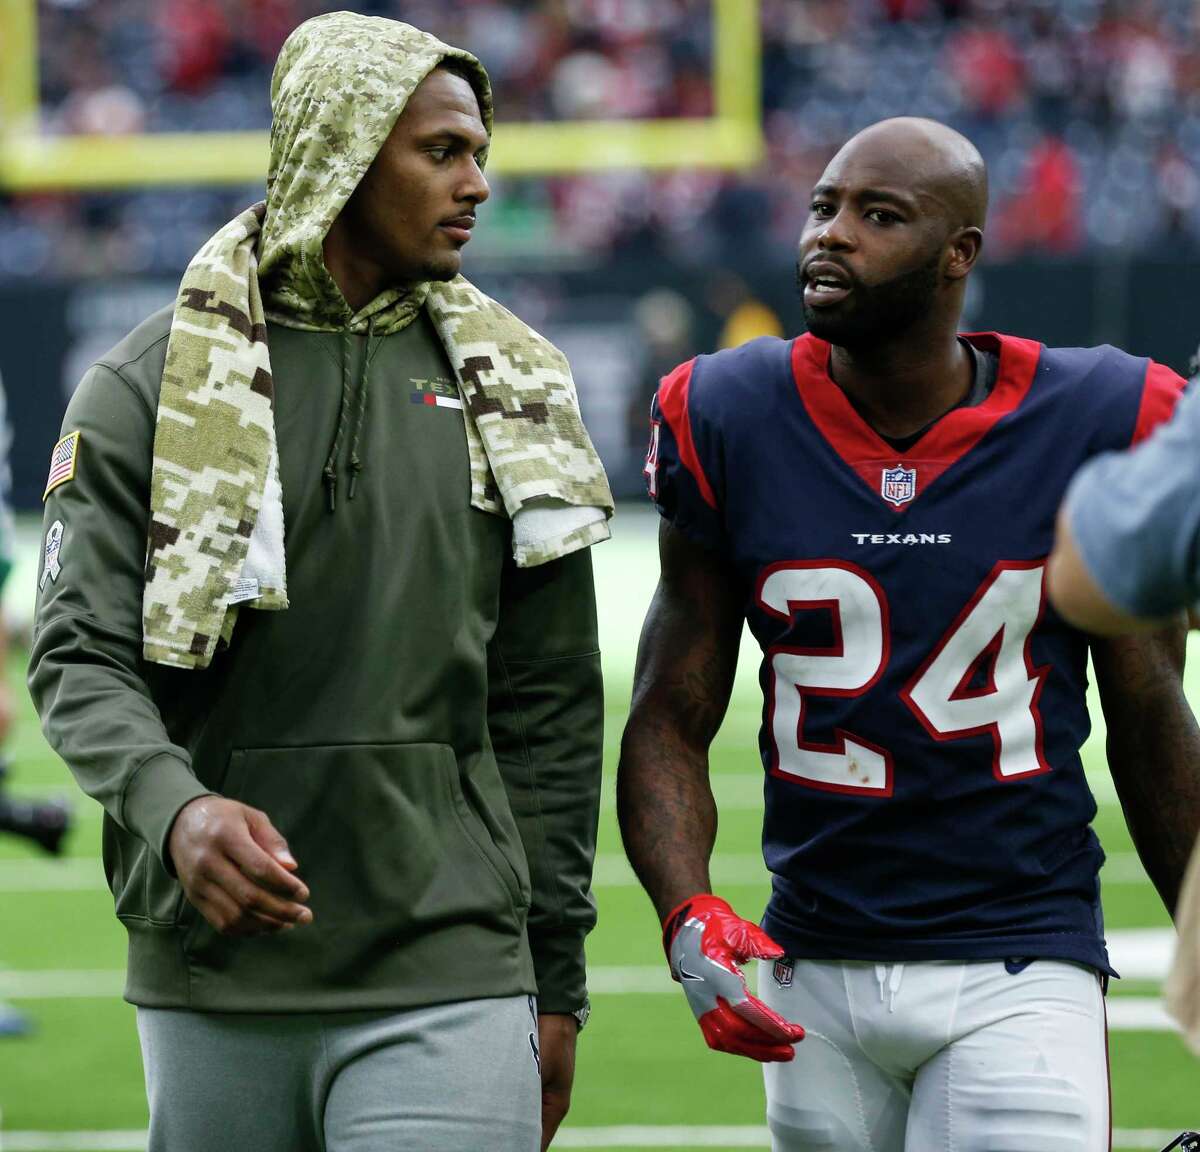 Houston Texans quarterback Deshaun Watson, left, walks off the field with cornerback Johnathan Joseph (24) after the Texans 20-14 loss to the Indianapolis Colts at NRG Stadium on Sunday, Nov. 5, 2017, in Houston.